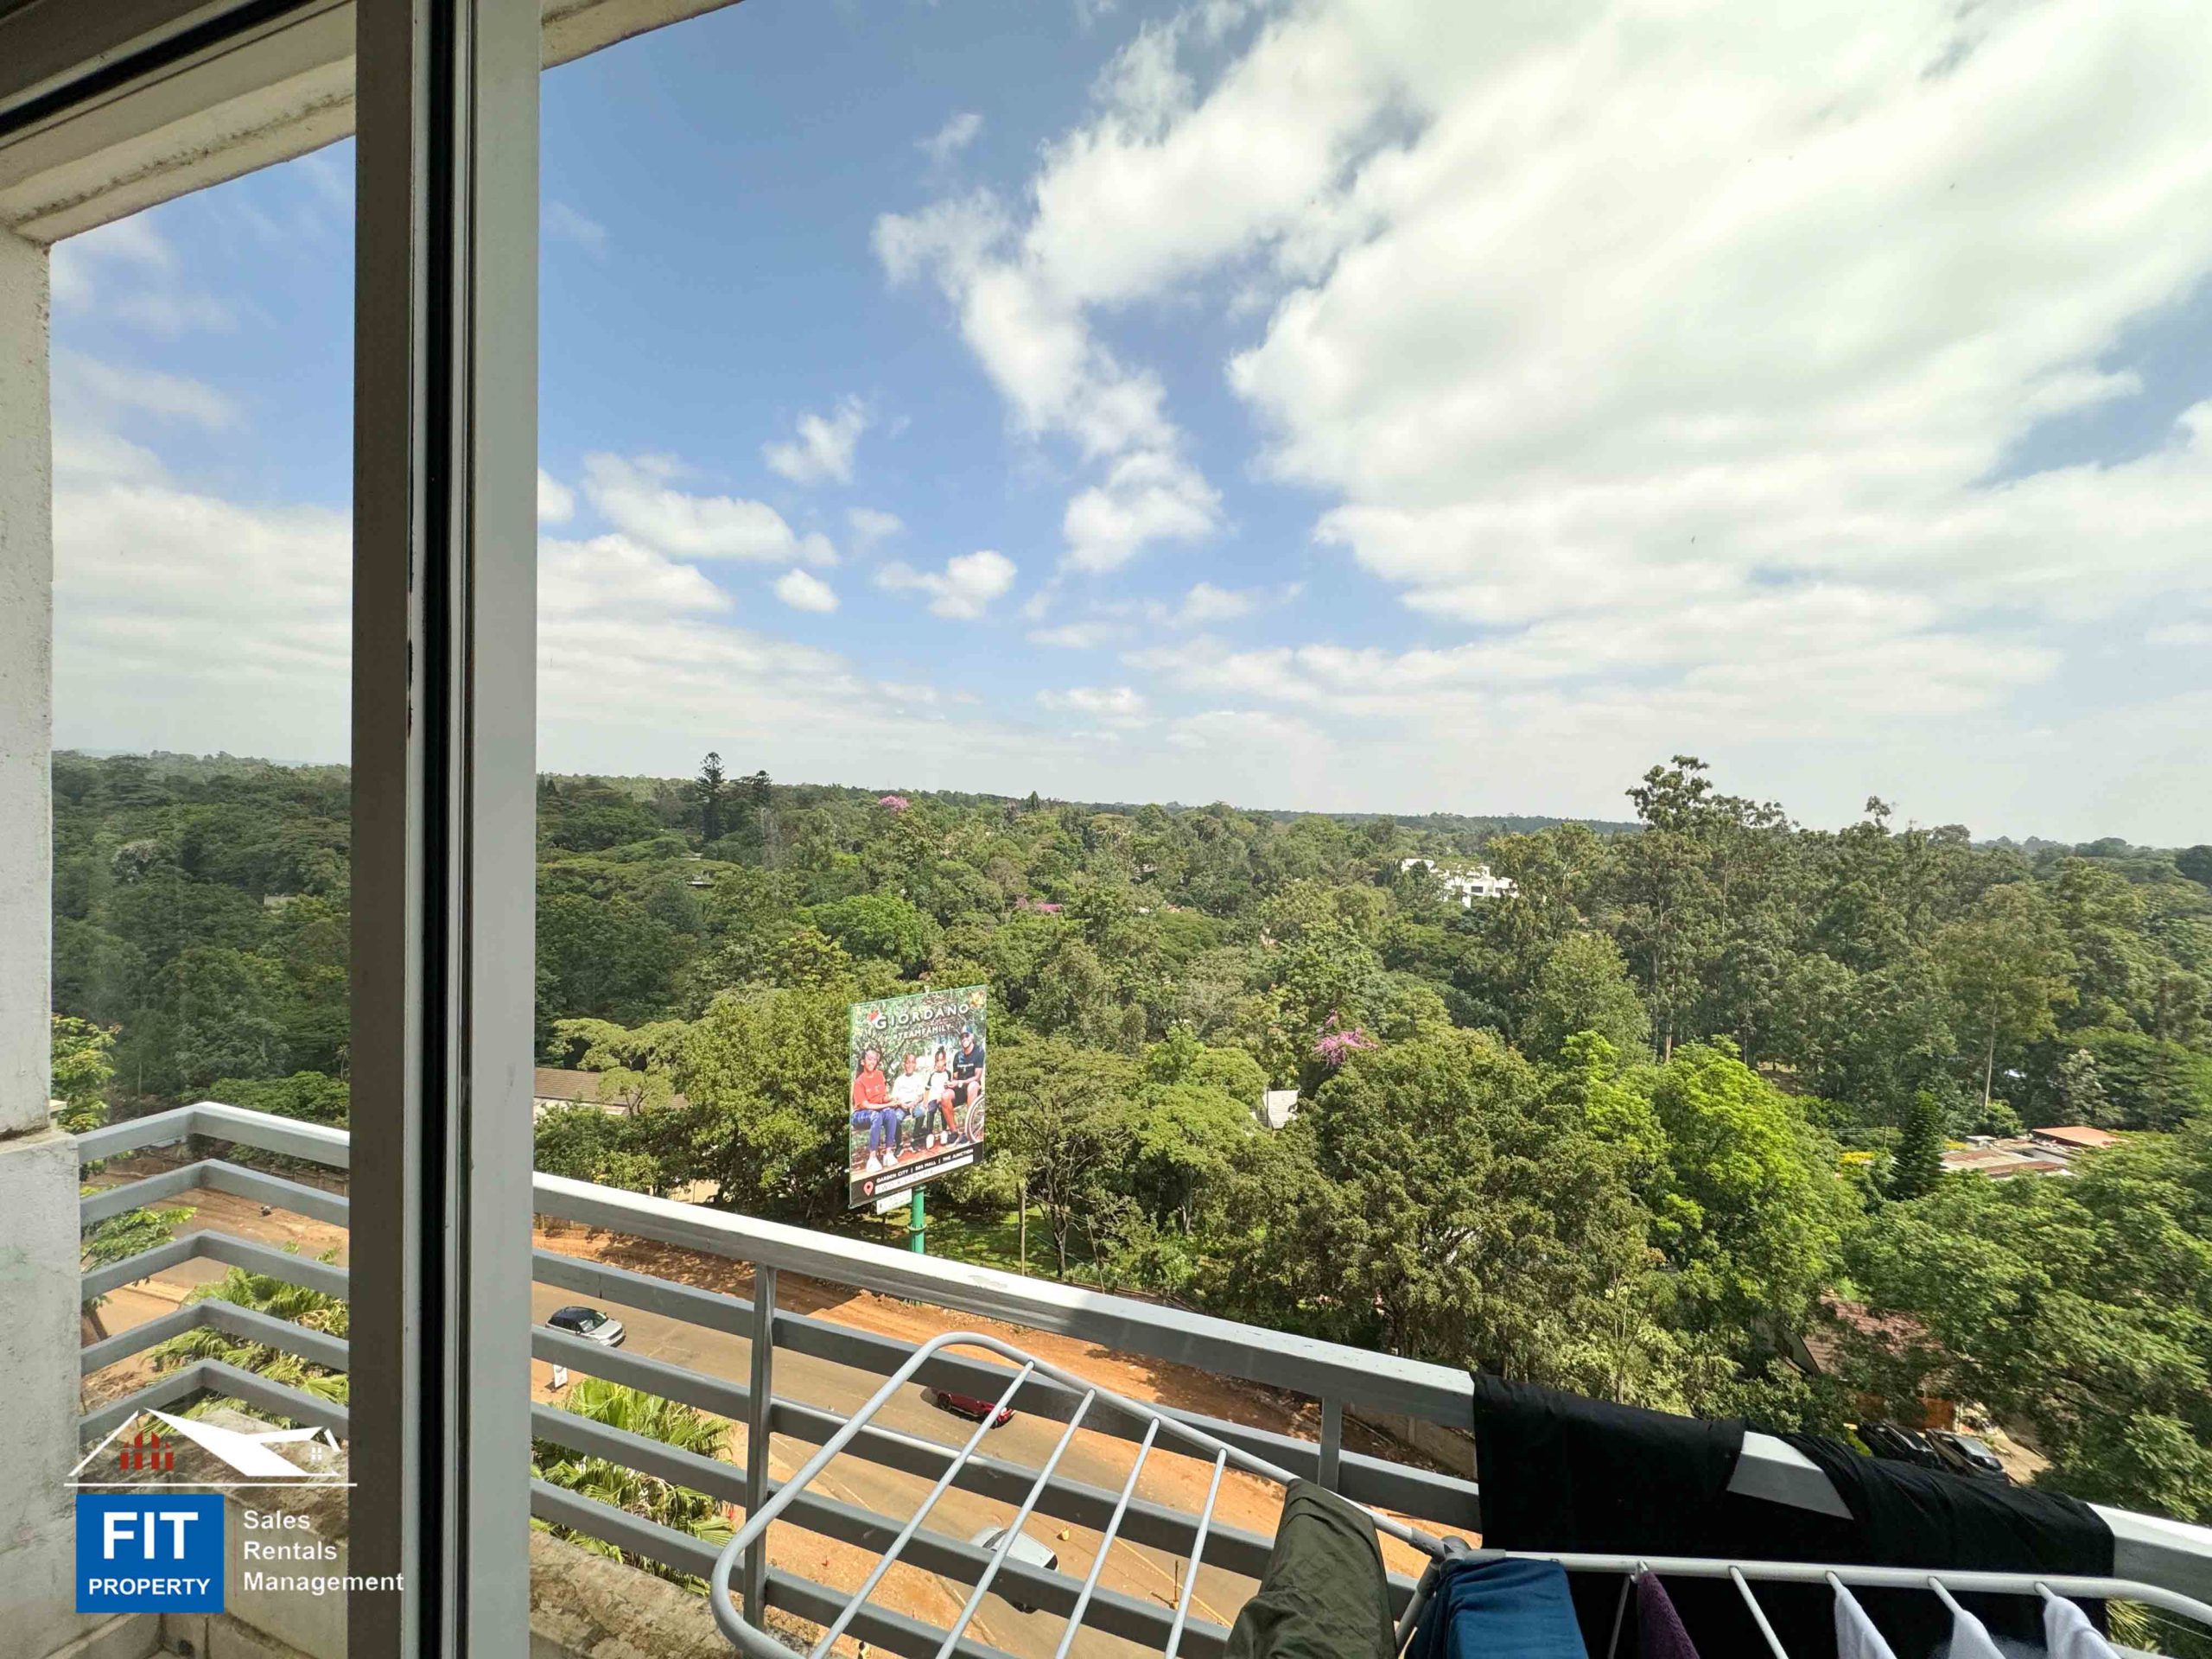 Captivating 3 Bed Penthouse for Sale, Overlooking Karura Forest, 6th Parklands, Nairobi. Priced at KES 22M fit property